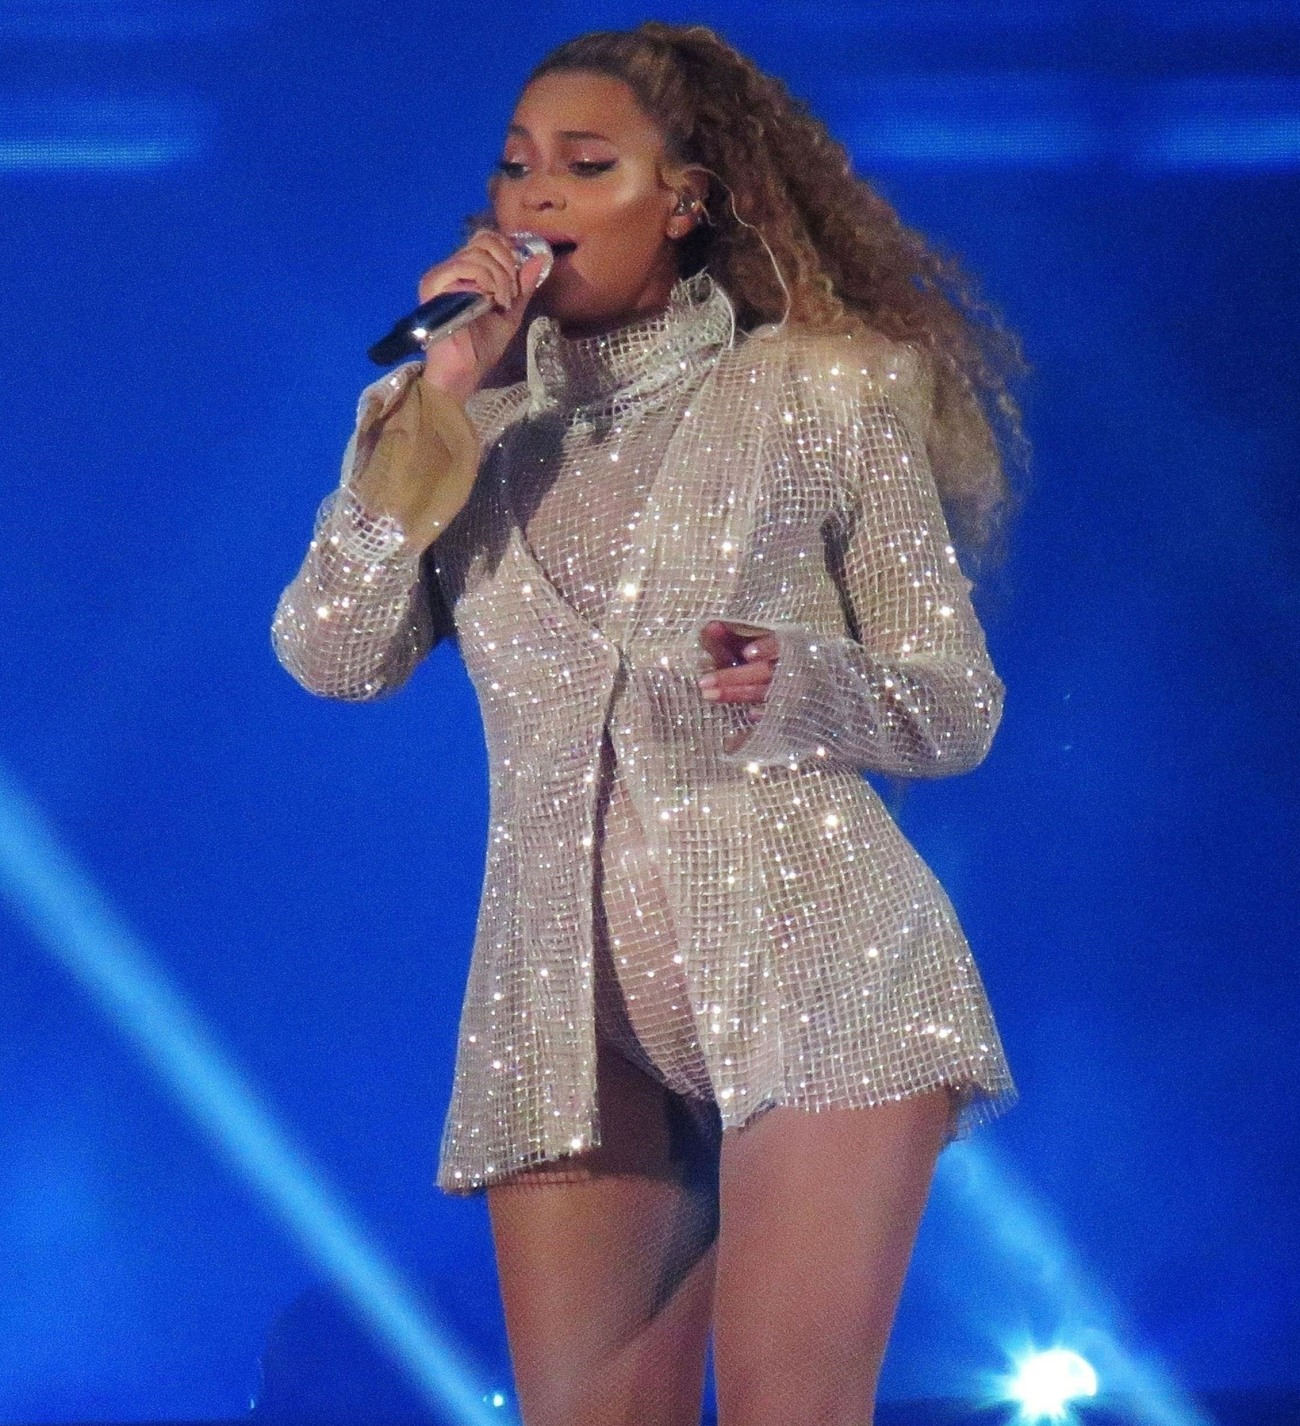 Beyonce and Jay Z perform live at the Principality Stadium in Cardiff